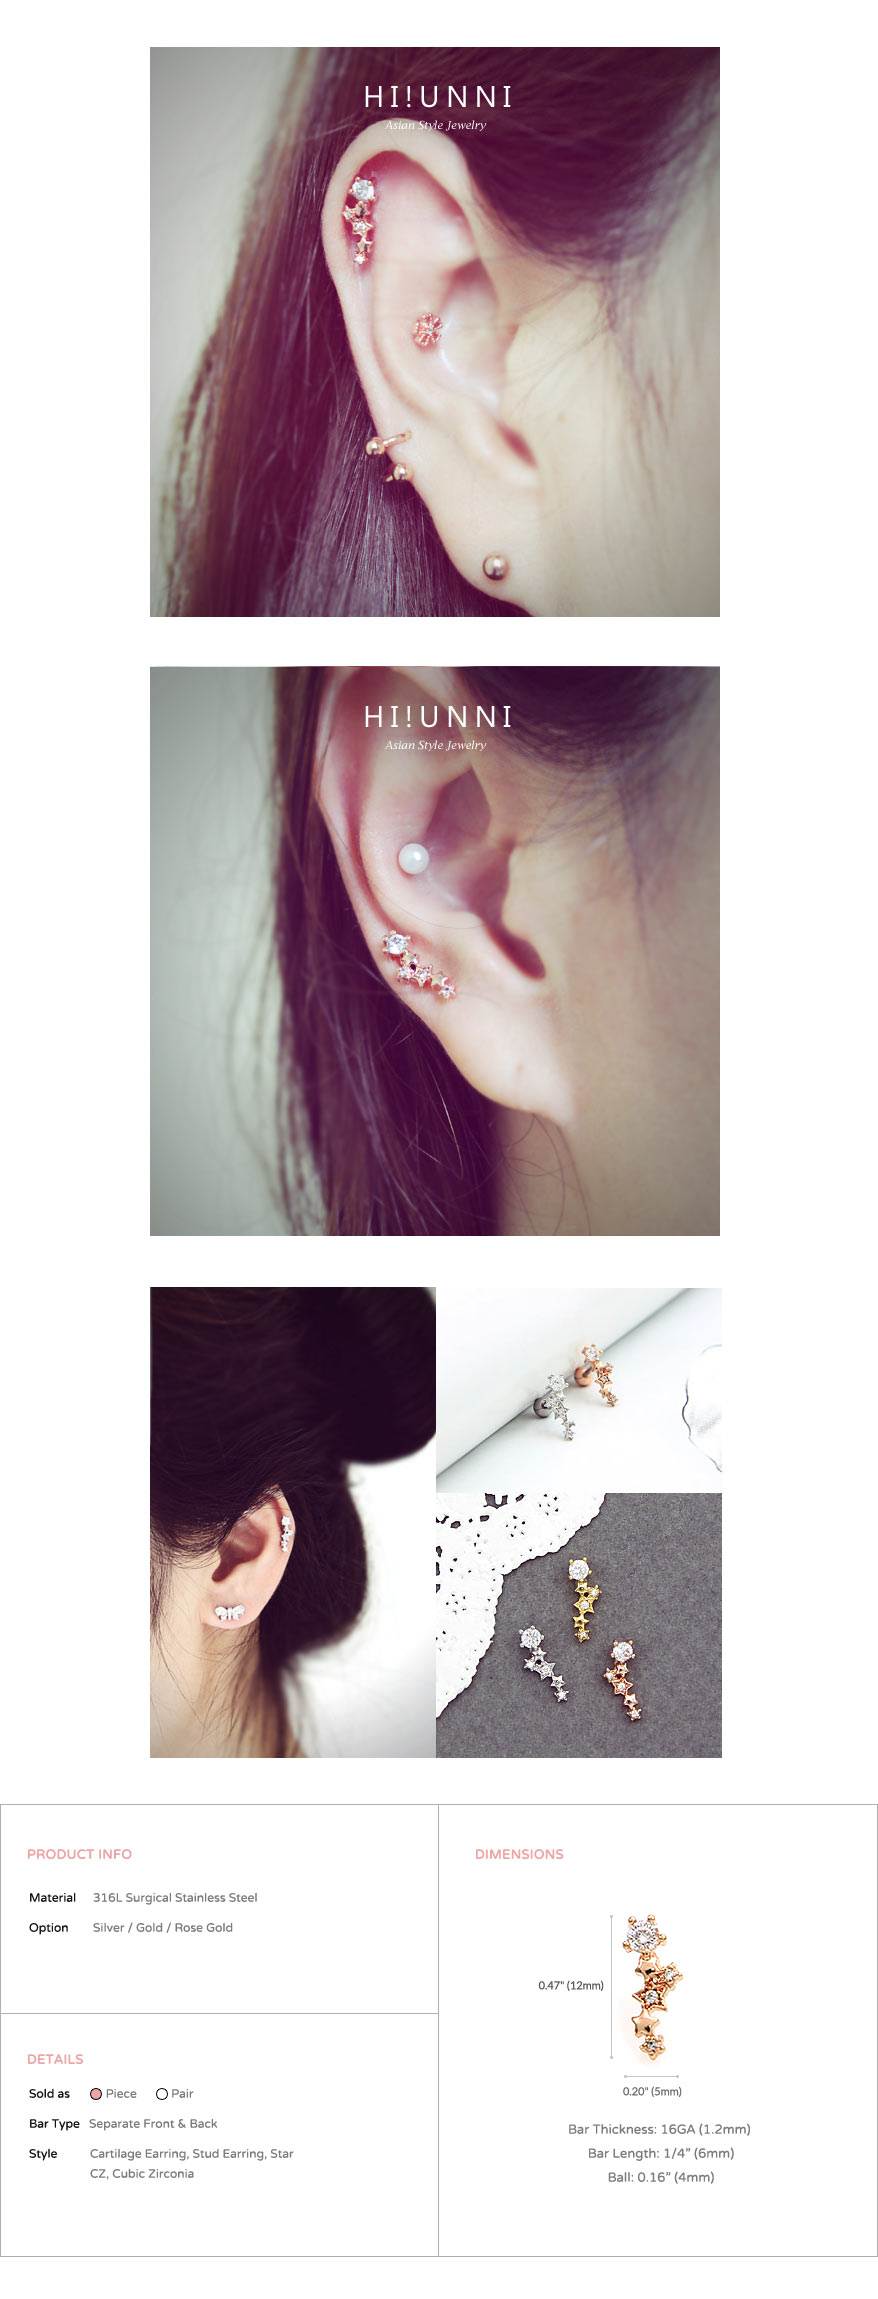 ear_studs_piercing_cartilage_earrings_16g_316l_surgical_stainless_steel_korean_asian_style_jewelry_barbell_rose_gold_helix_conch_labret_star_4